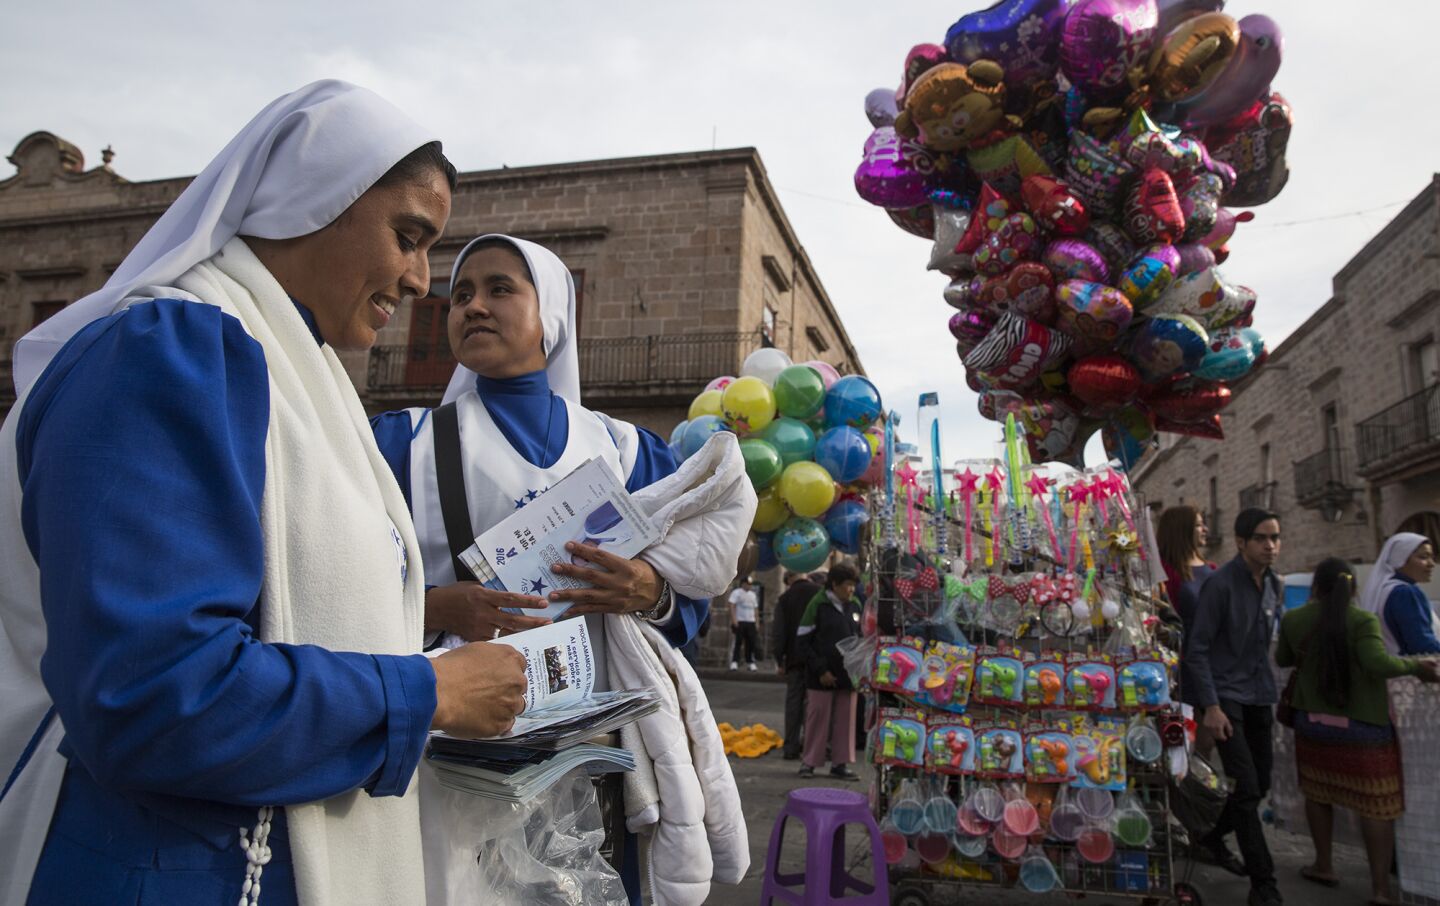 Nuns in the square at the Morelia Cathedral as preparations continue for Pope Francis' arrival in Morelia, Michoacan.